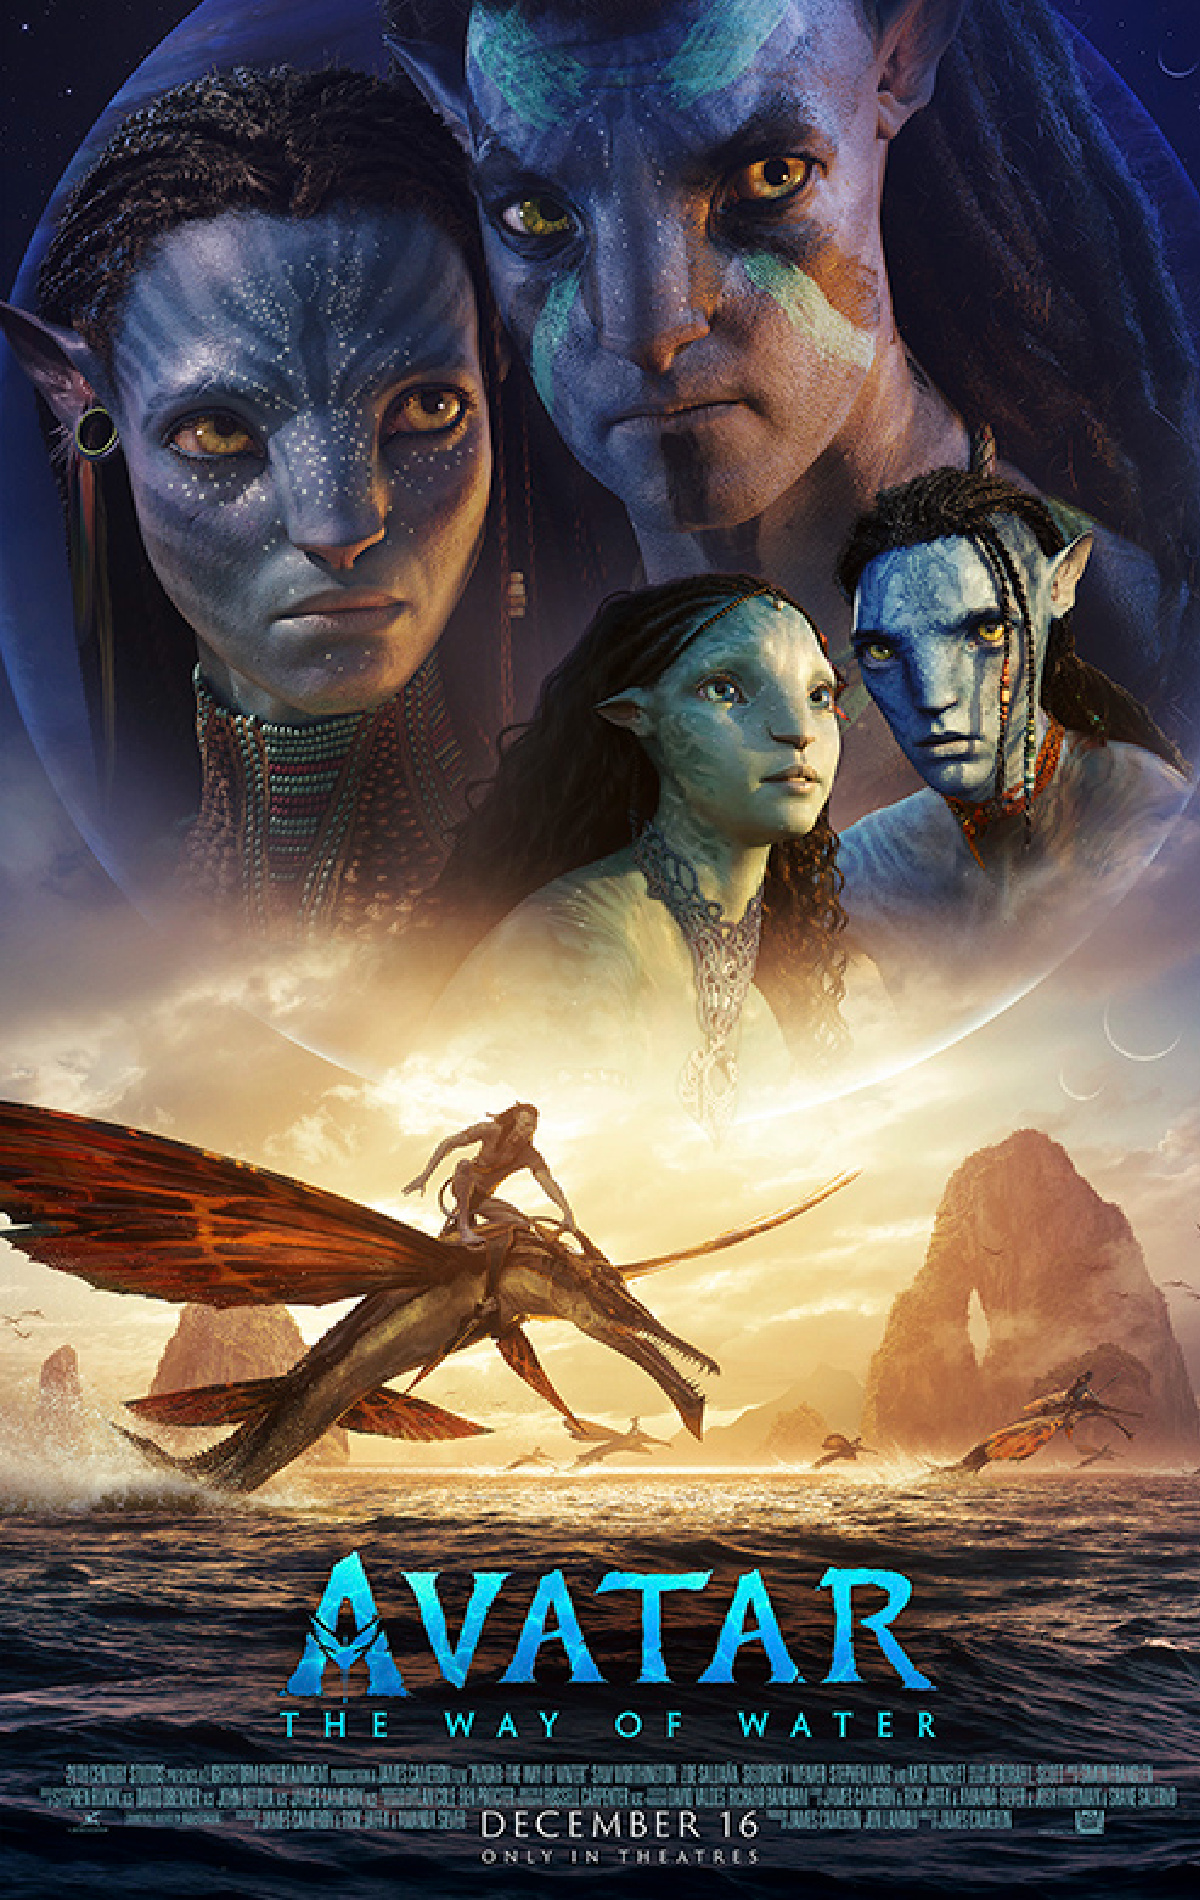 'Avatar: The Way of Water' opens in theaters on December 16, 2022.